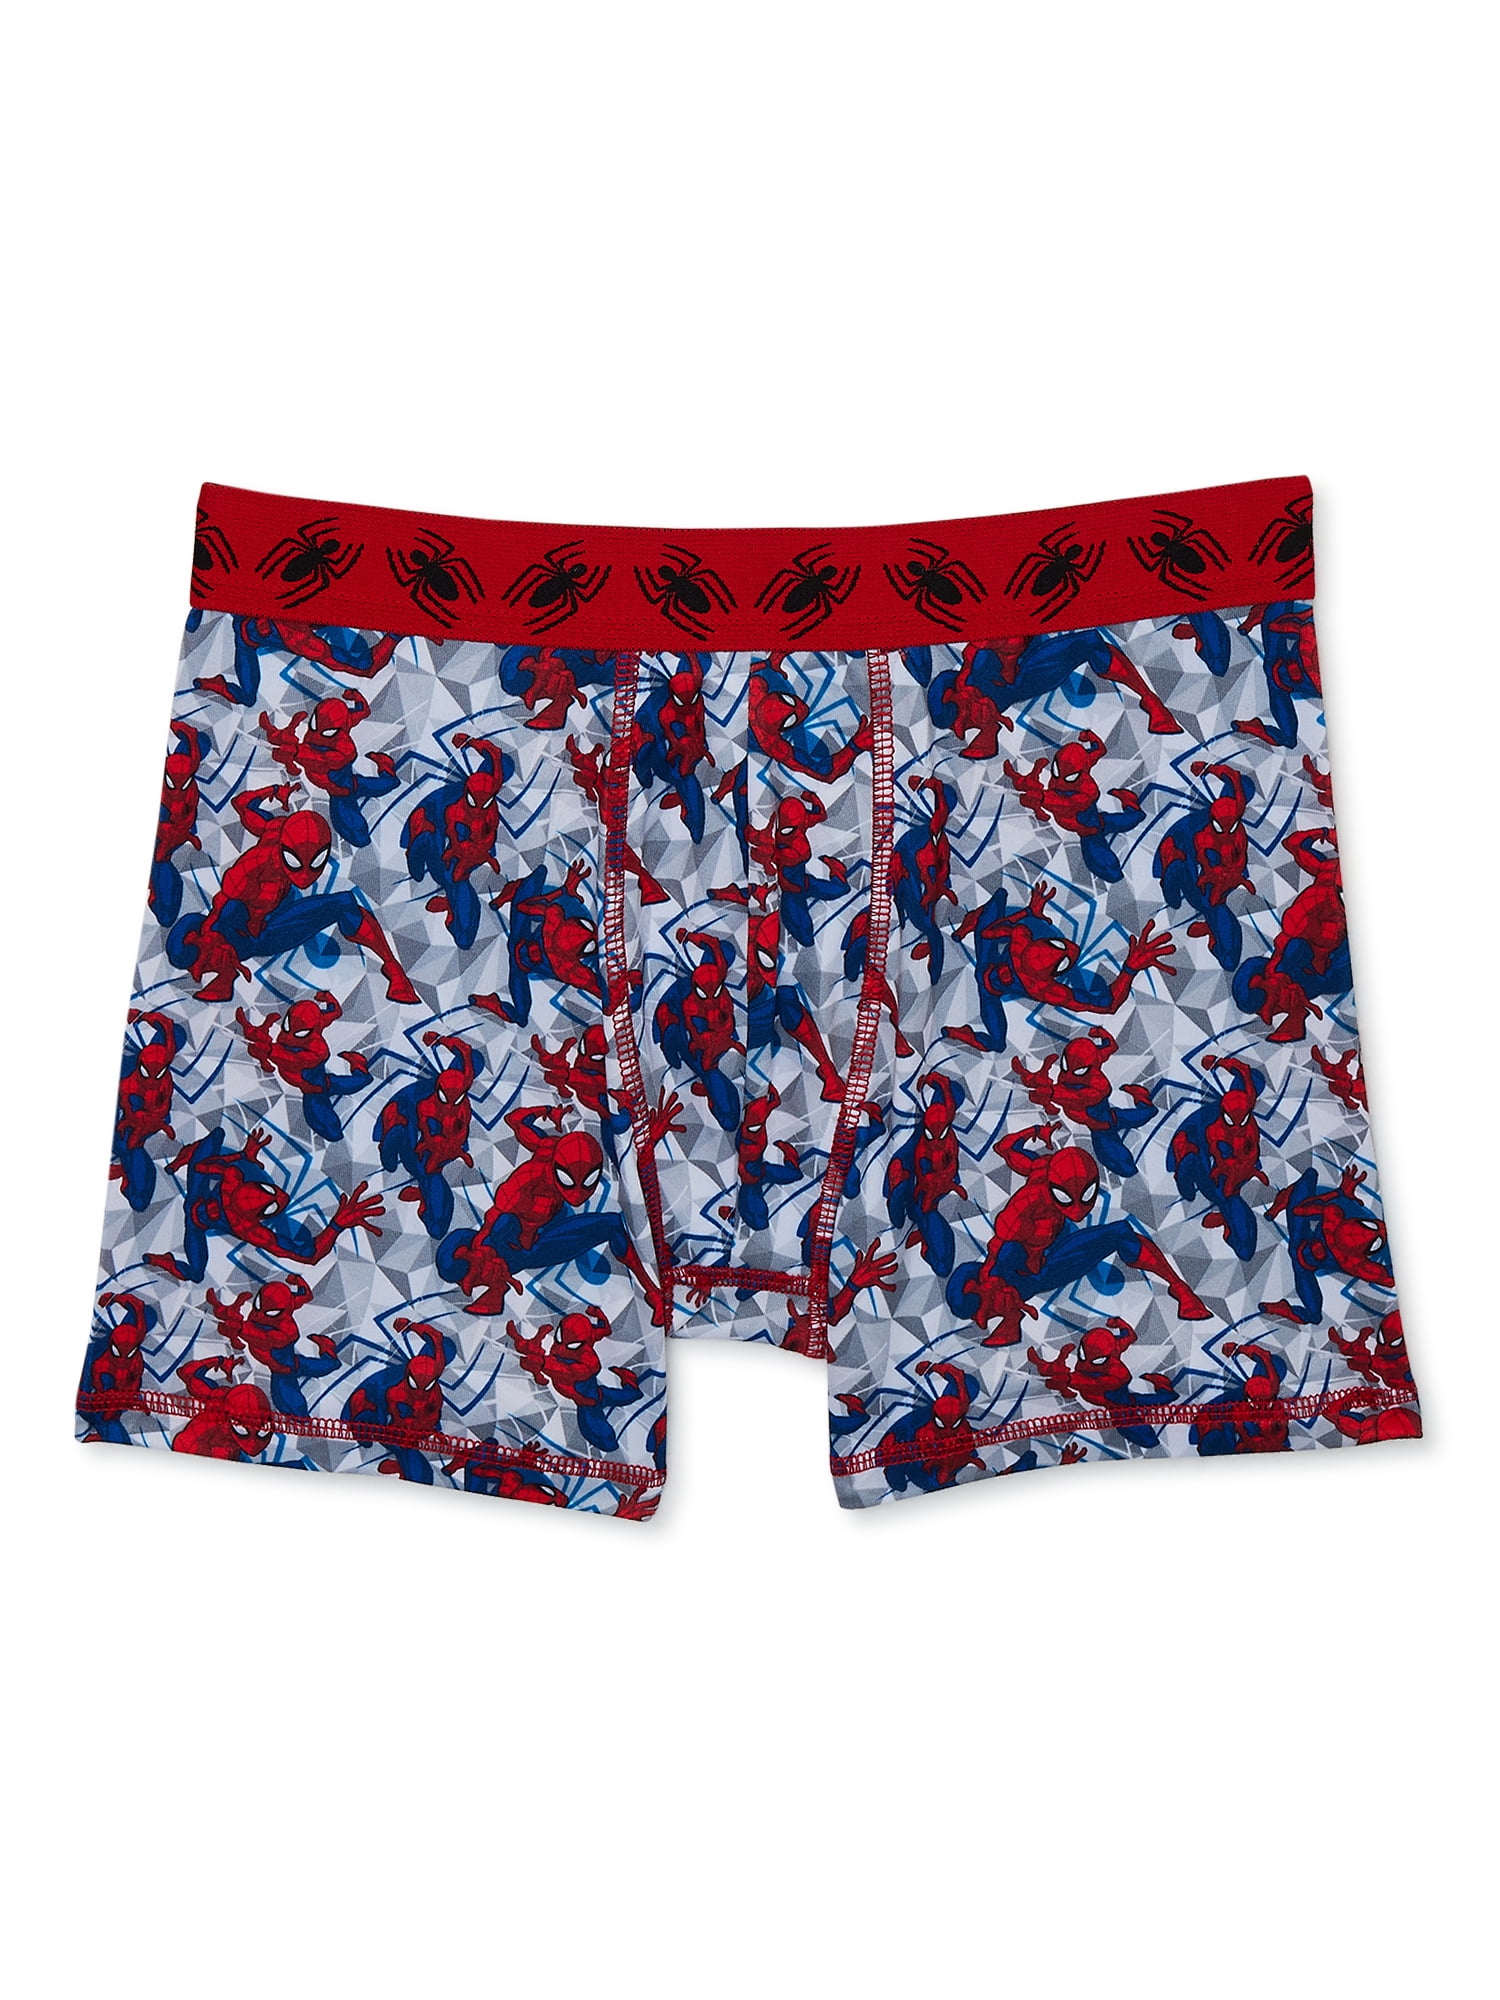 Shop Spiderman Brief For Boys with great discounts and prices